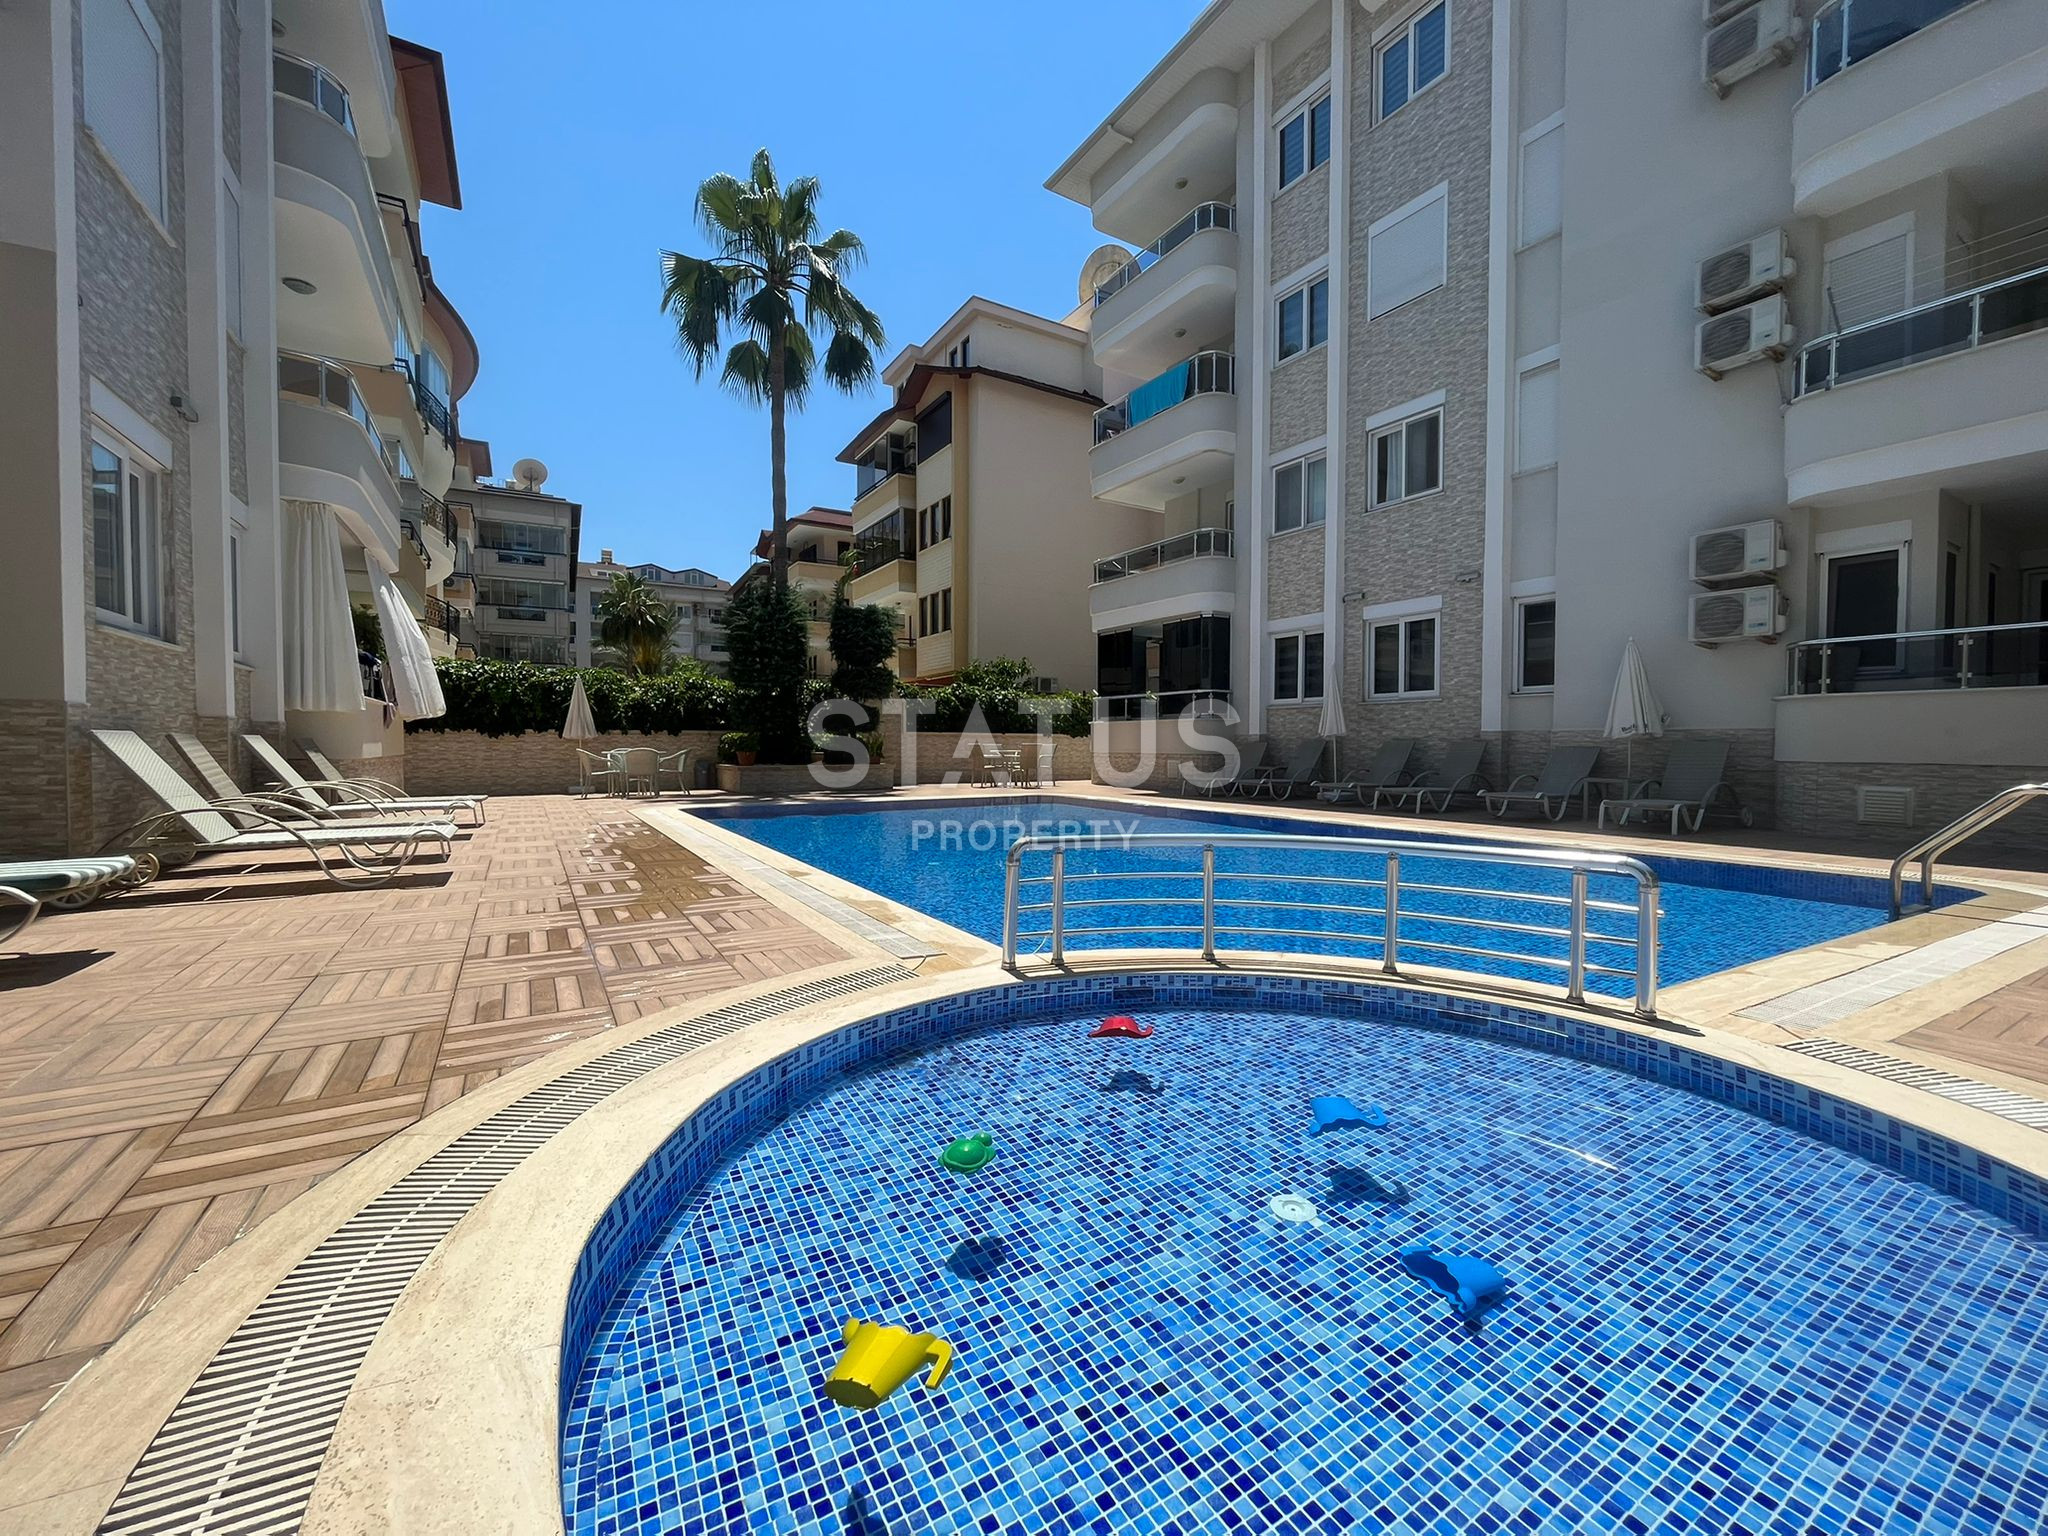 One-bedroom furnished apartment from a leading developer in OBA. 50m2 фото 1